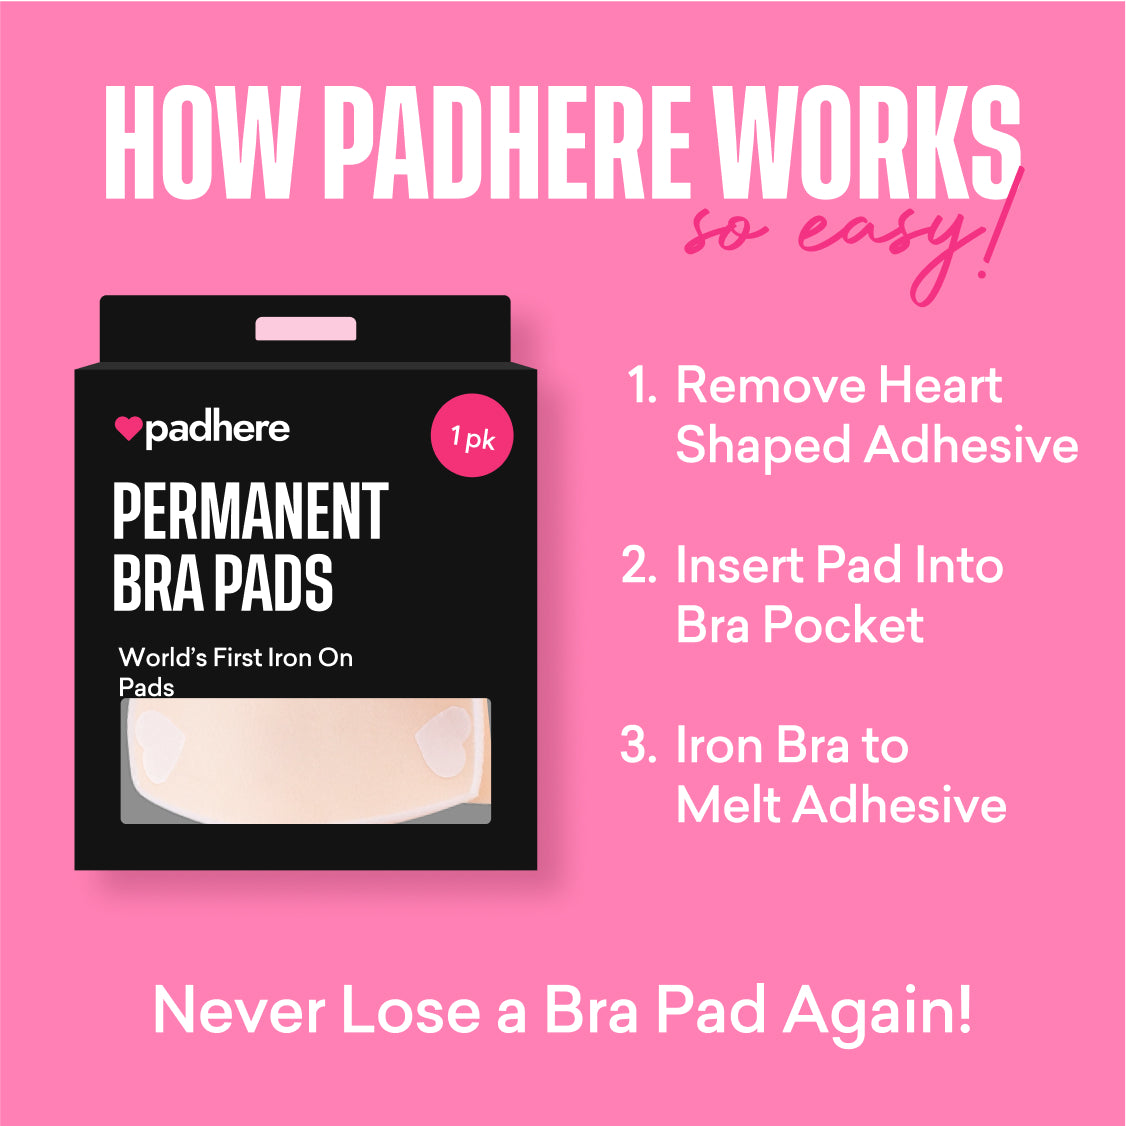 How To Remove & Insert Sports Bra Pads 